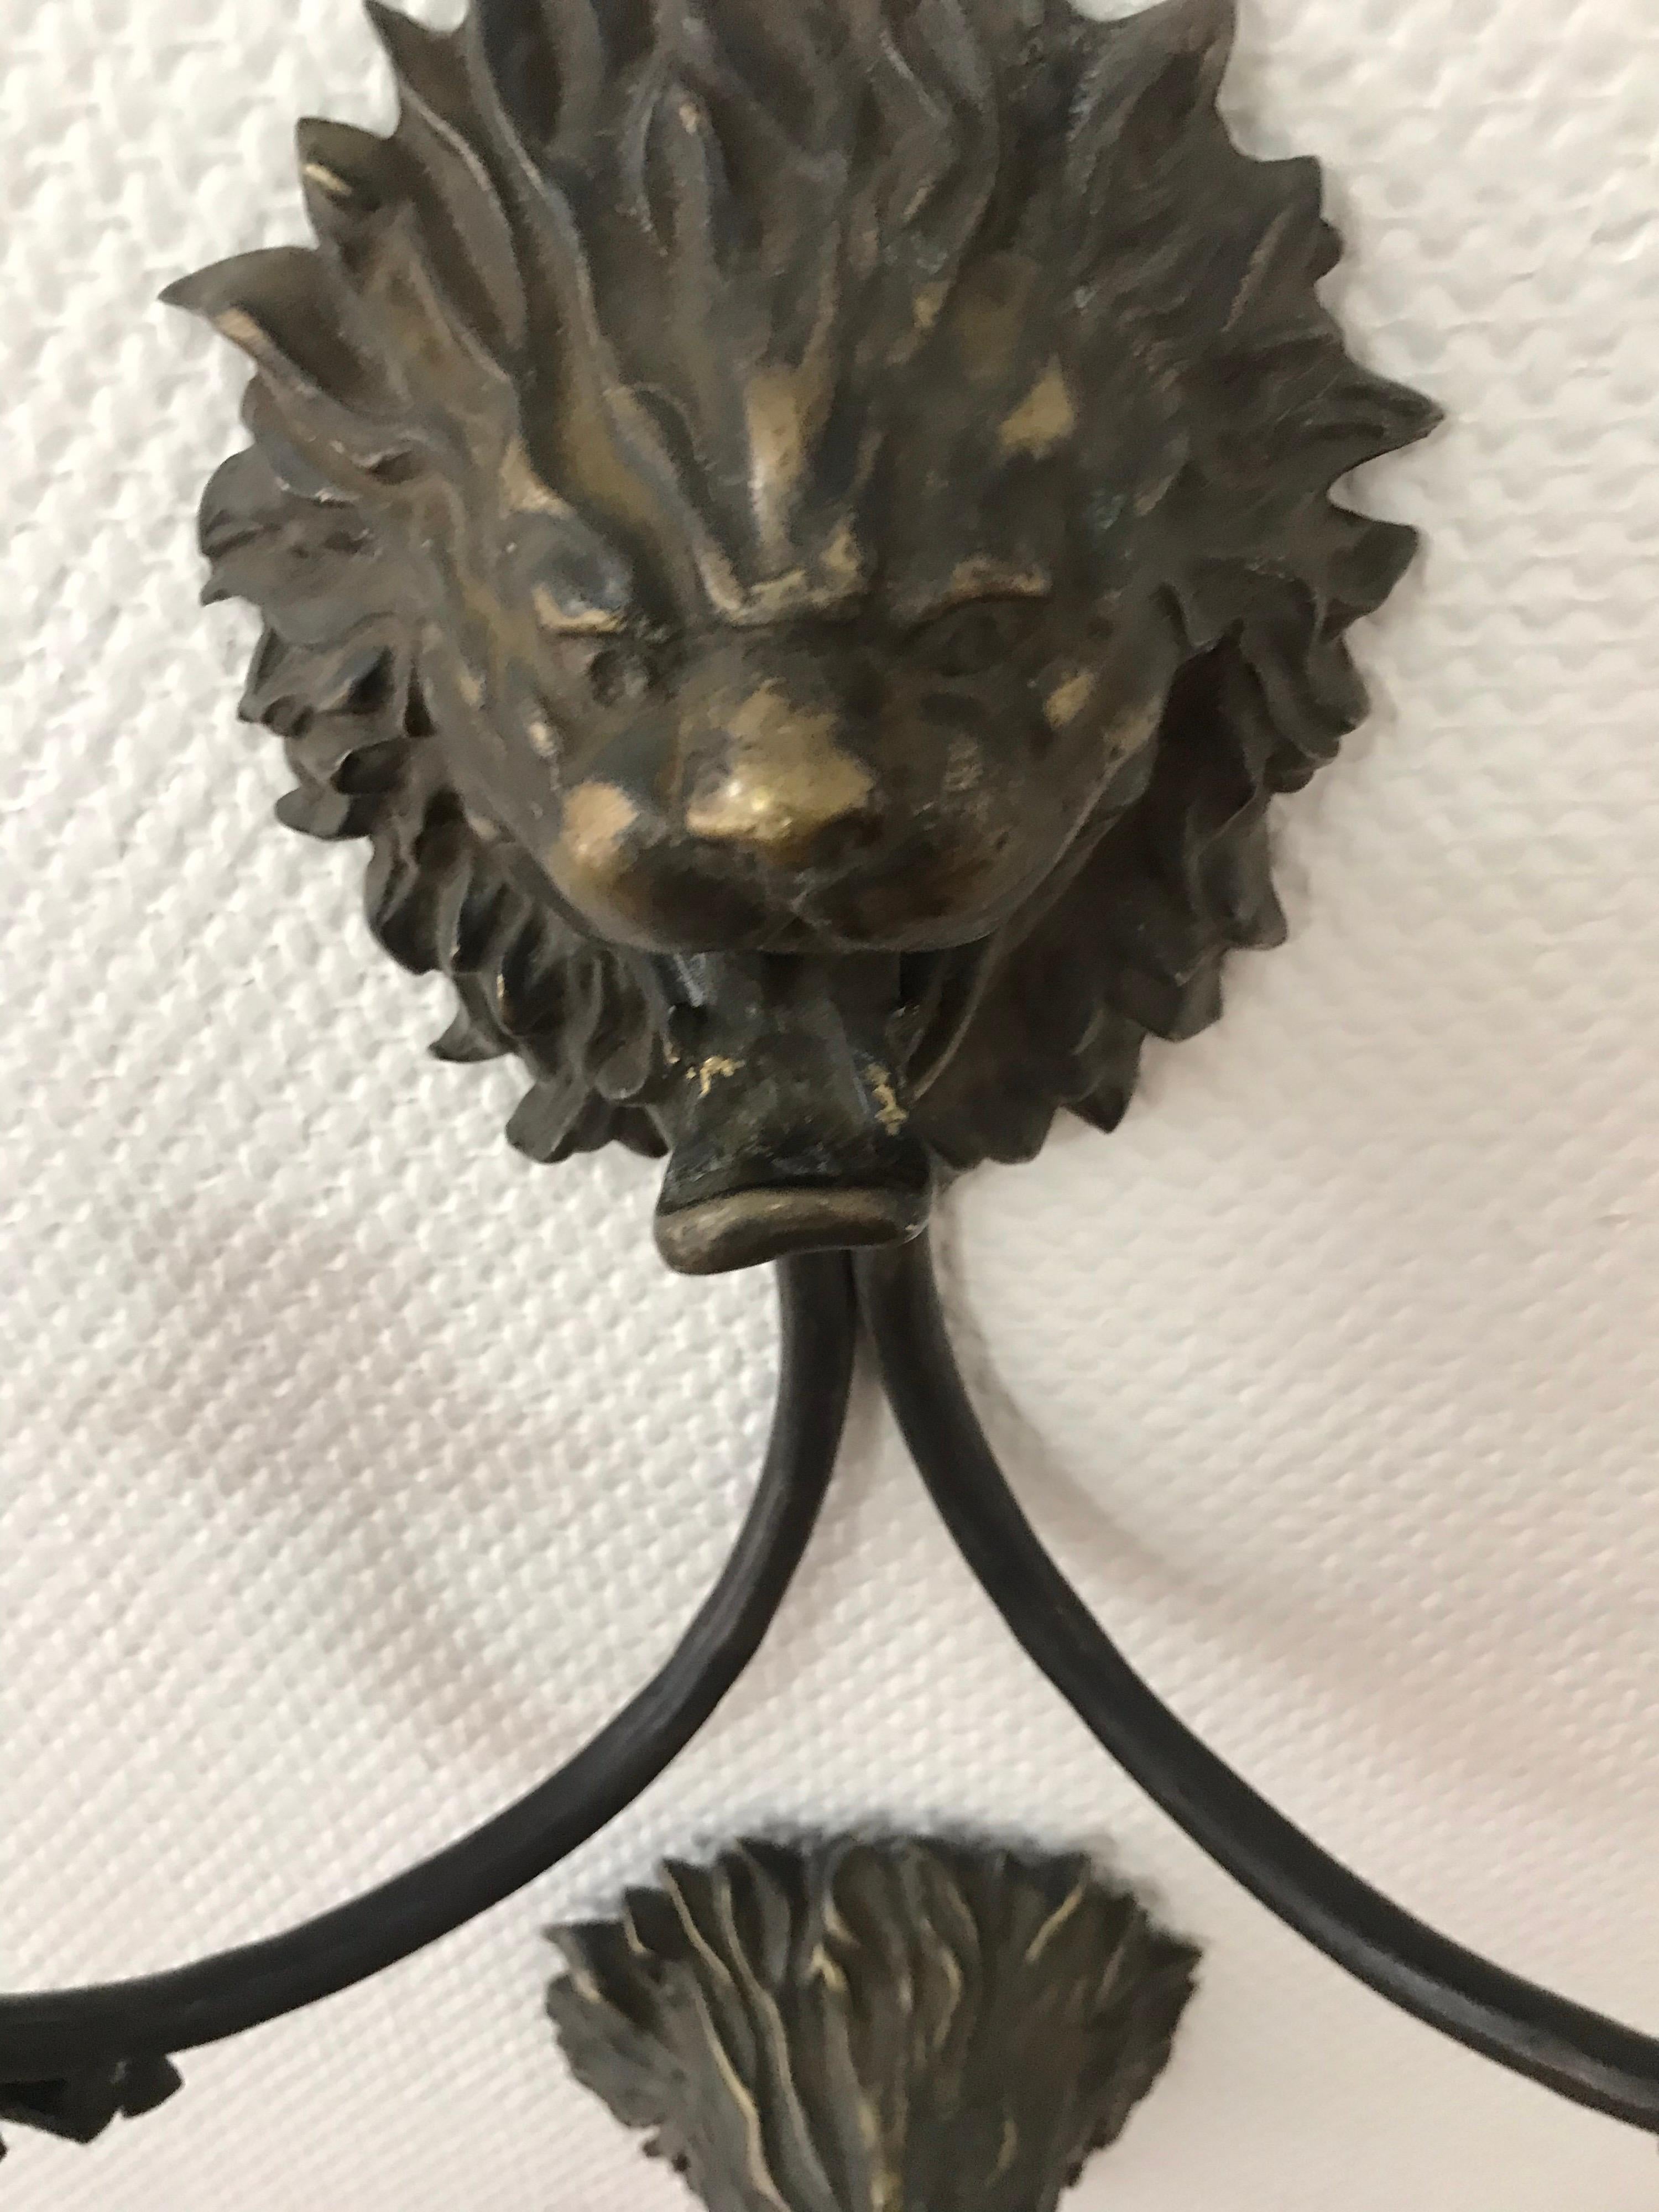 This is a pair of heavy metal or bronze Lion candle sconces from mid to late 20th century.